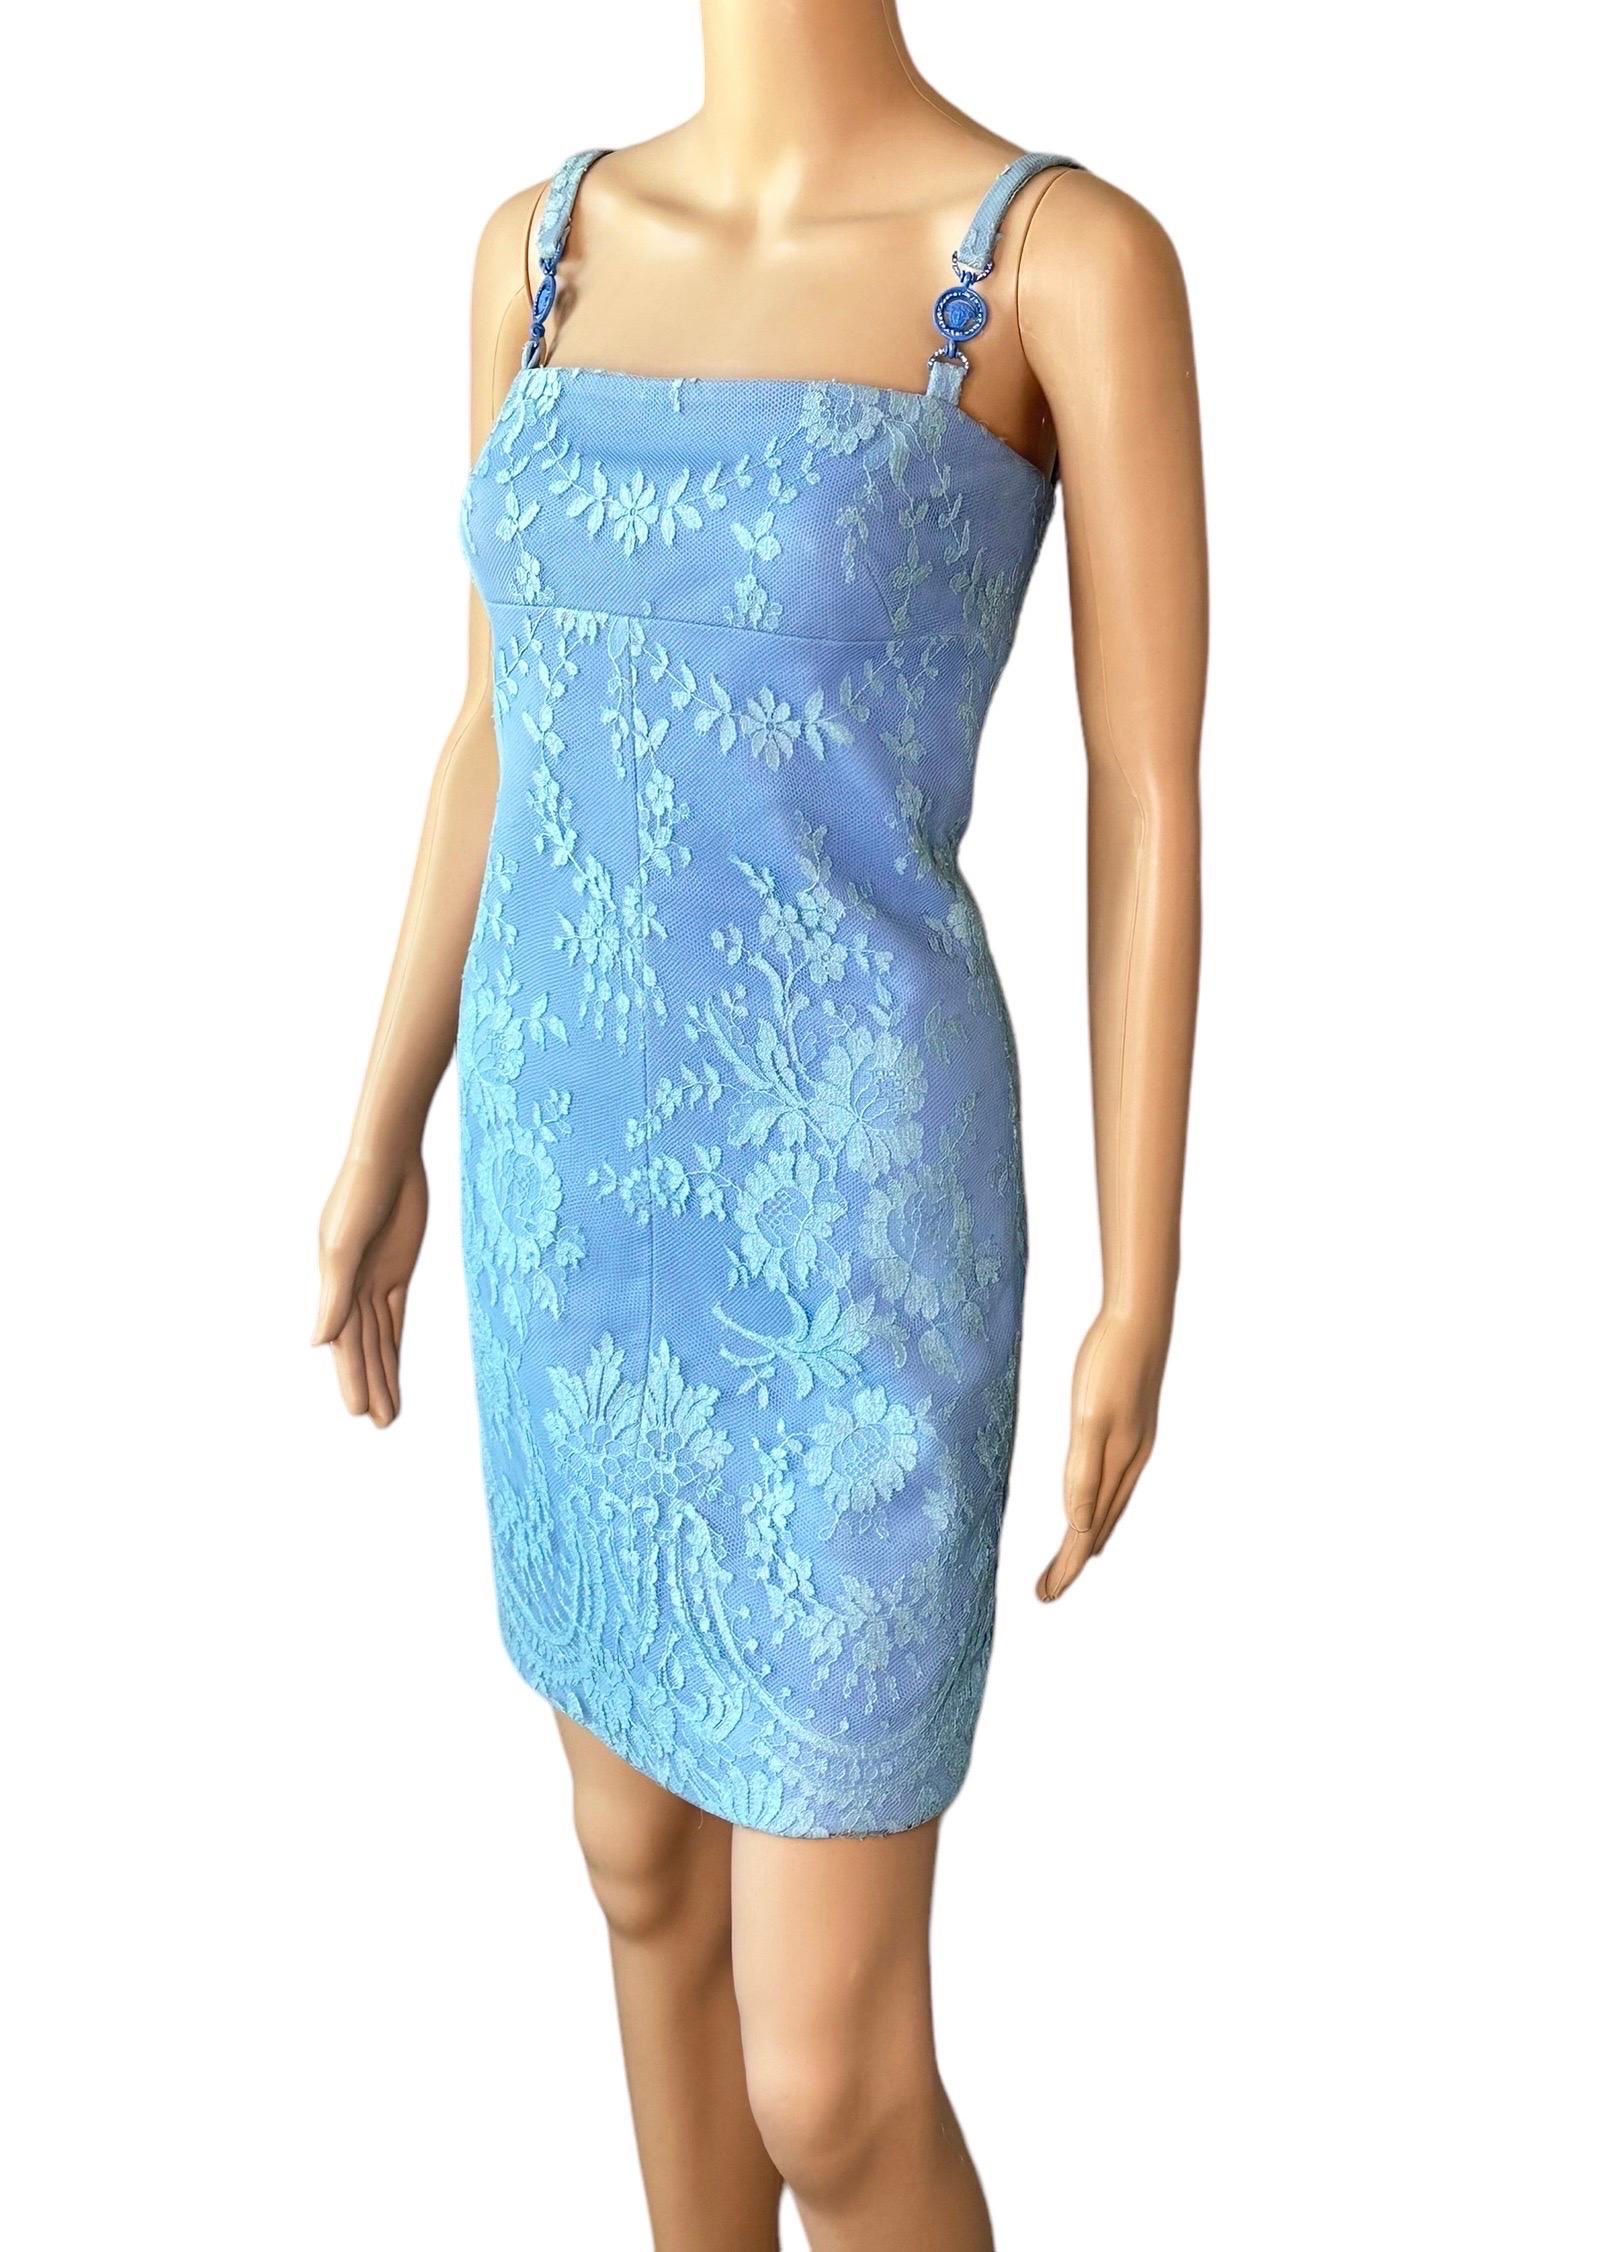 Gianni Versace F/W 1996 Vintage Floral Lace and Leather Blue Mini Dress  For Sale 5